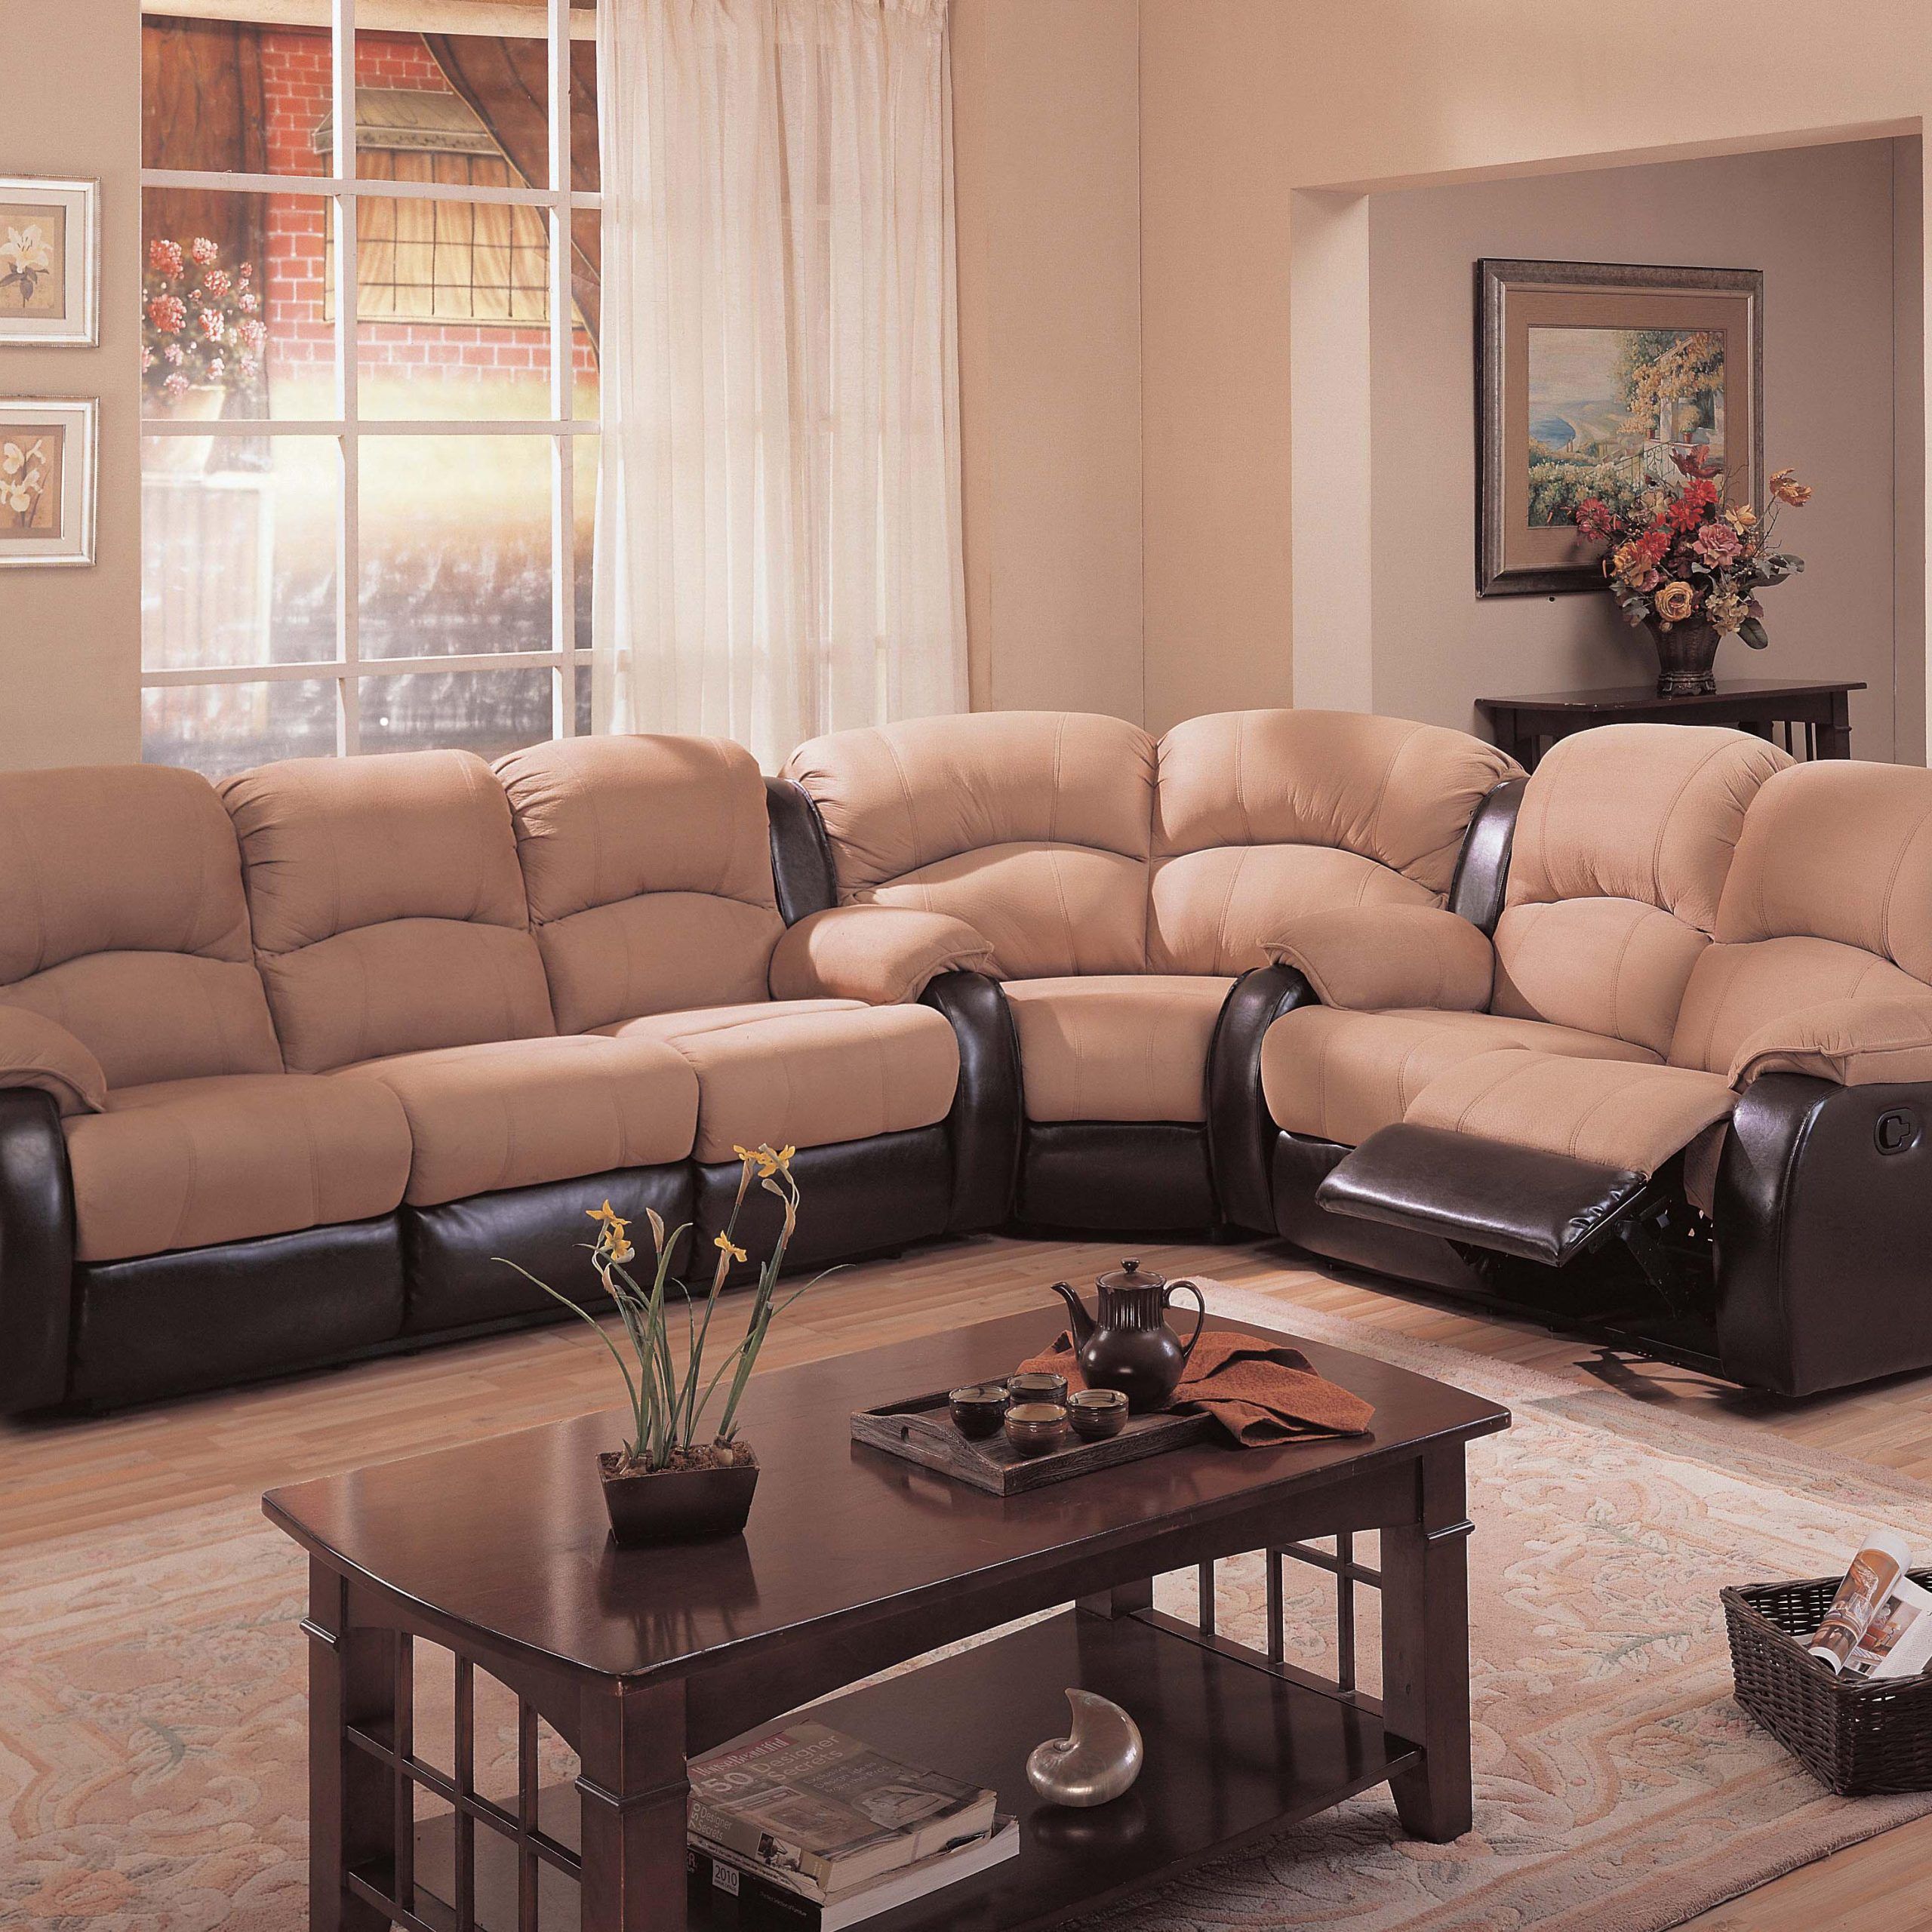 Microfiber Sectional Couch With Recliner: Chic Features For Your Home Throughout 2 Tone Chocolate Microfiber Sofas (View 12 of 20)